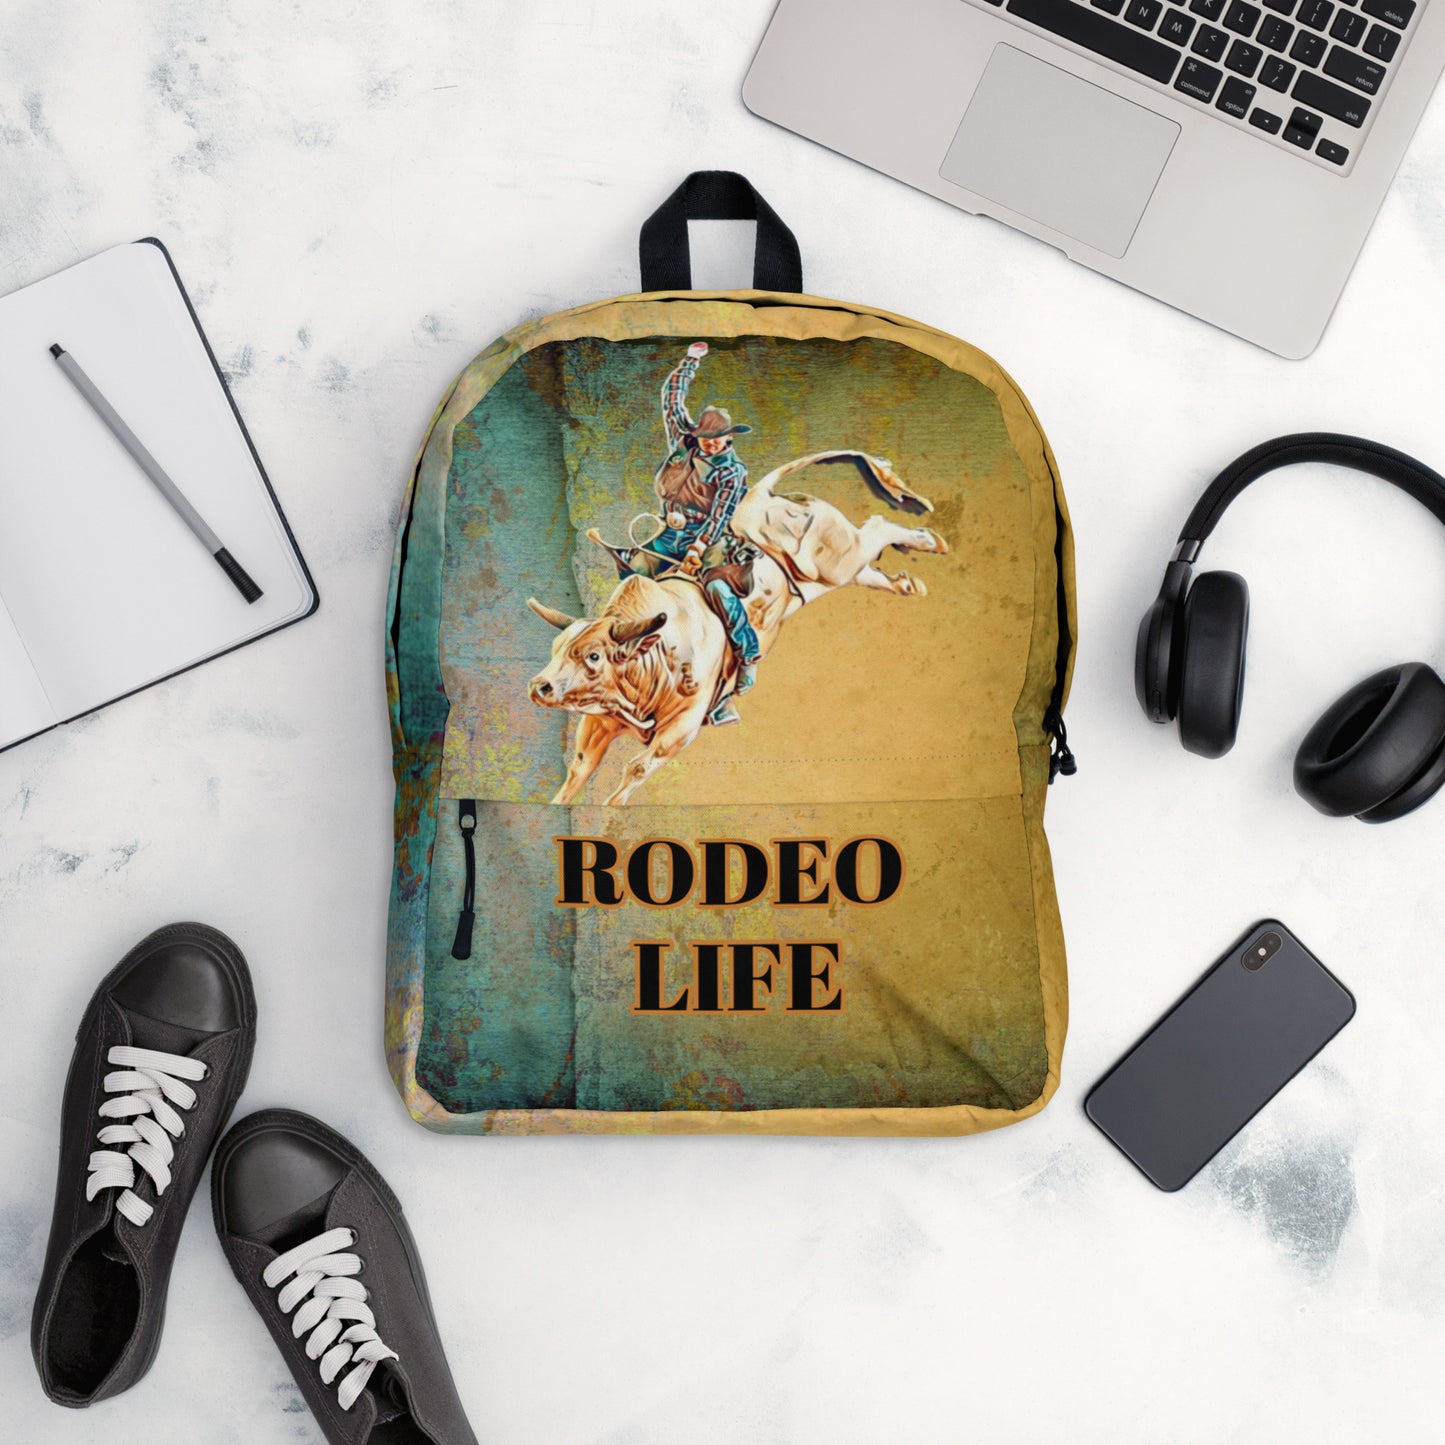 Bullrider Rodeo Life Backpack - back pack, backpack, bull rider, bullrider, gym, rodeo, rodeo life, rodeo style, rodeolife, weekend, workout -  - Baha Ranch Western Wear